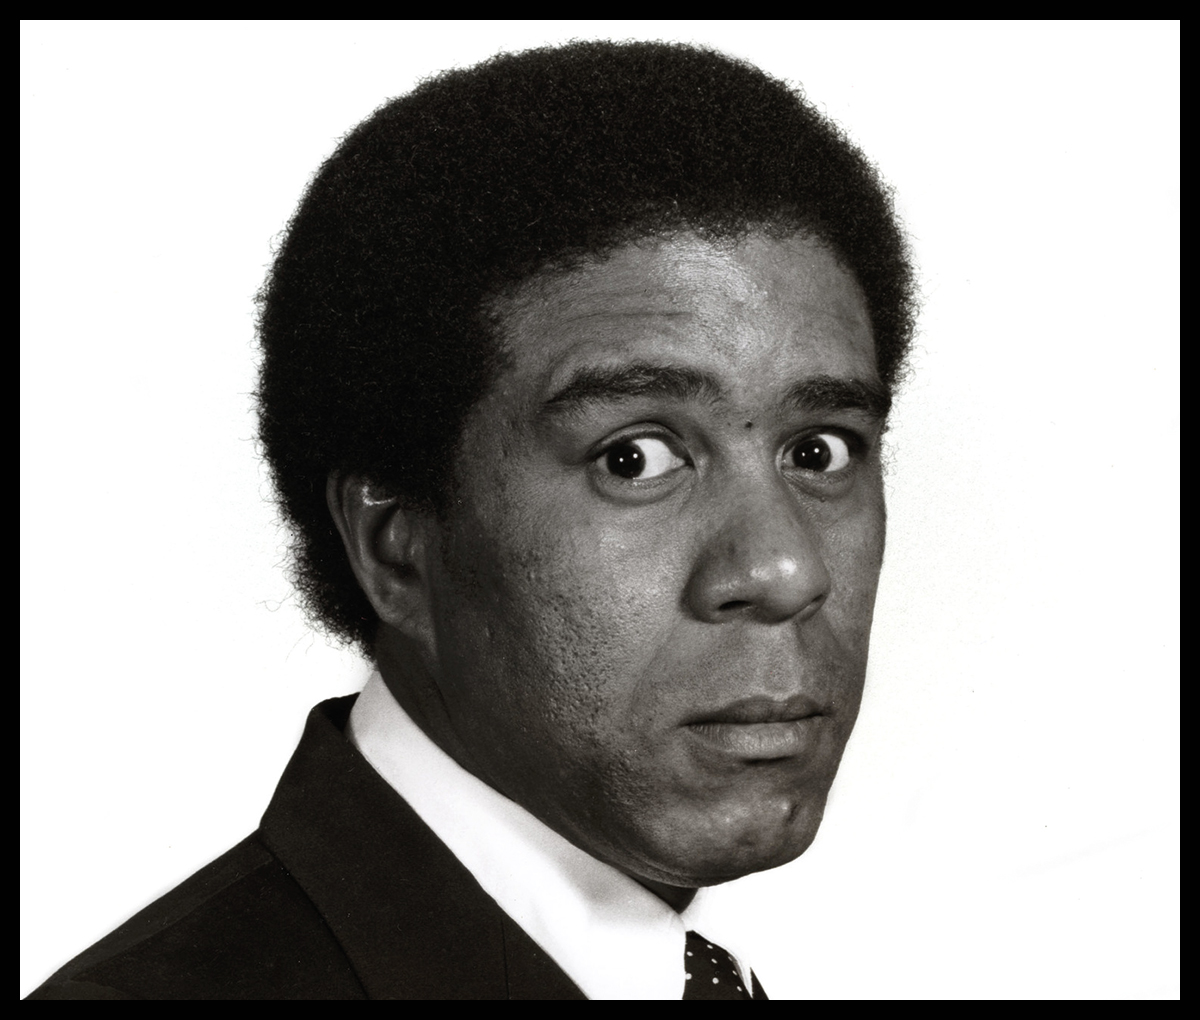 Richard Pryor / Jerry seinfeld referred to him as the picasso of our